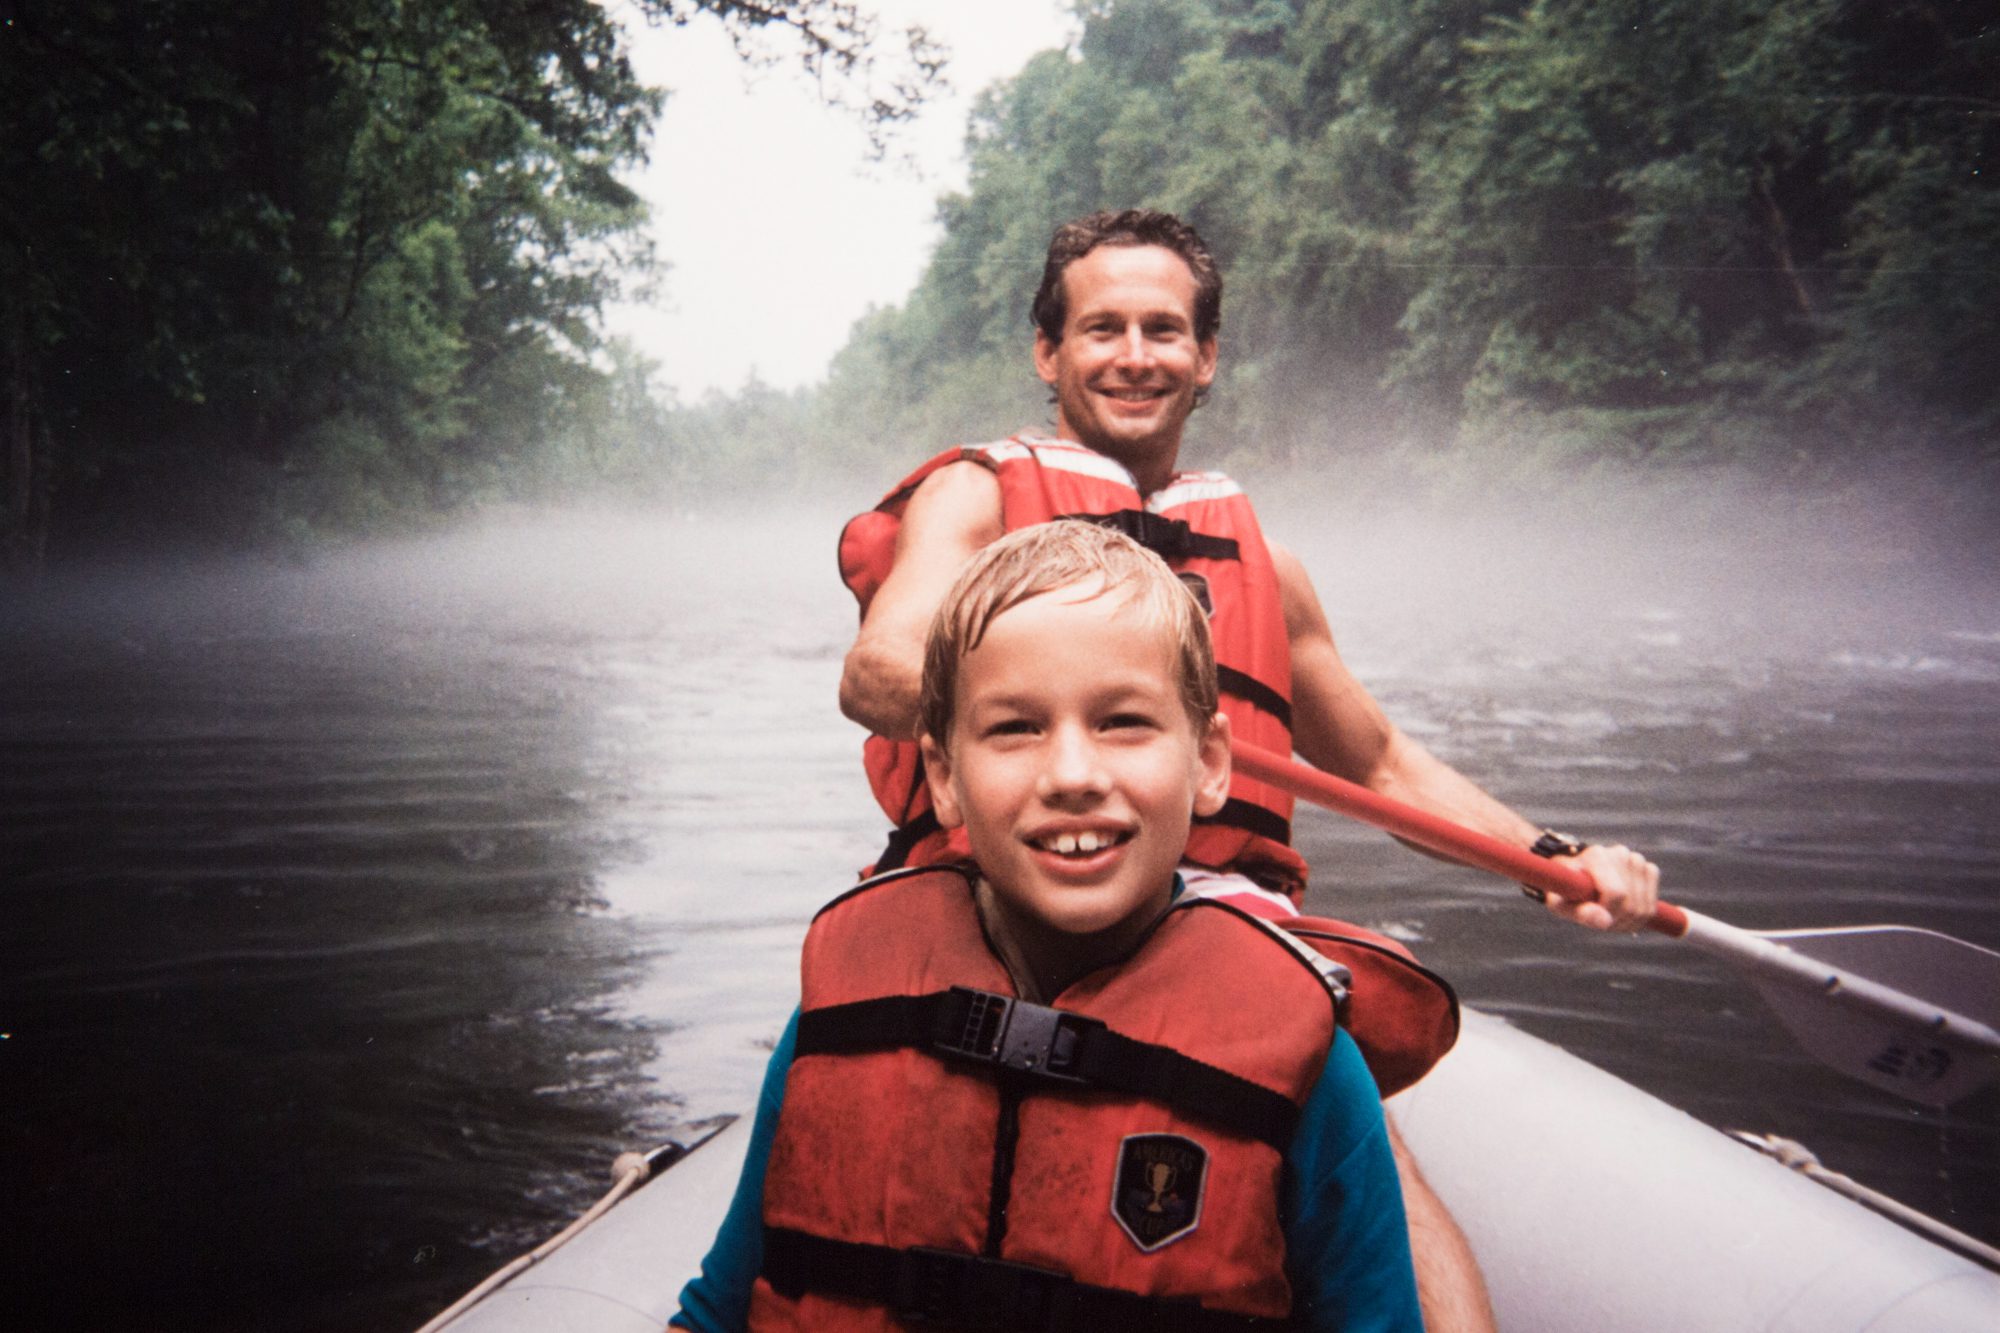 A person and a child wearing life jackets are smiling in a canoe surrounded by mist on a tranquil river, suggesting a joyful outdoor adventure.